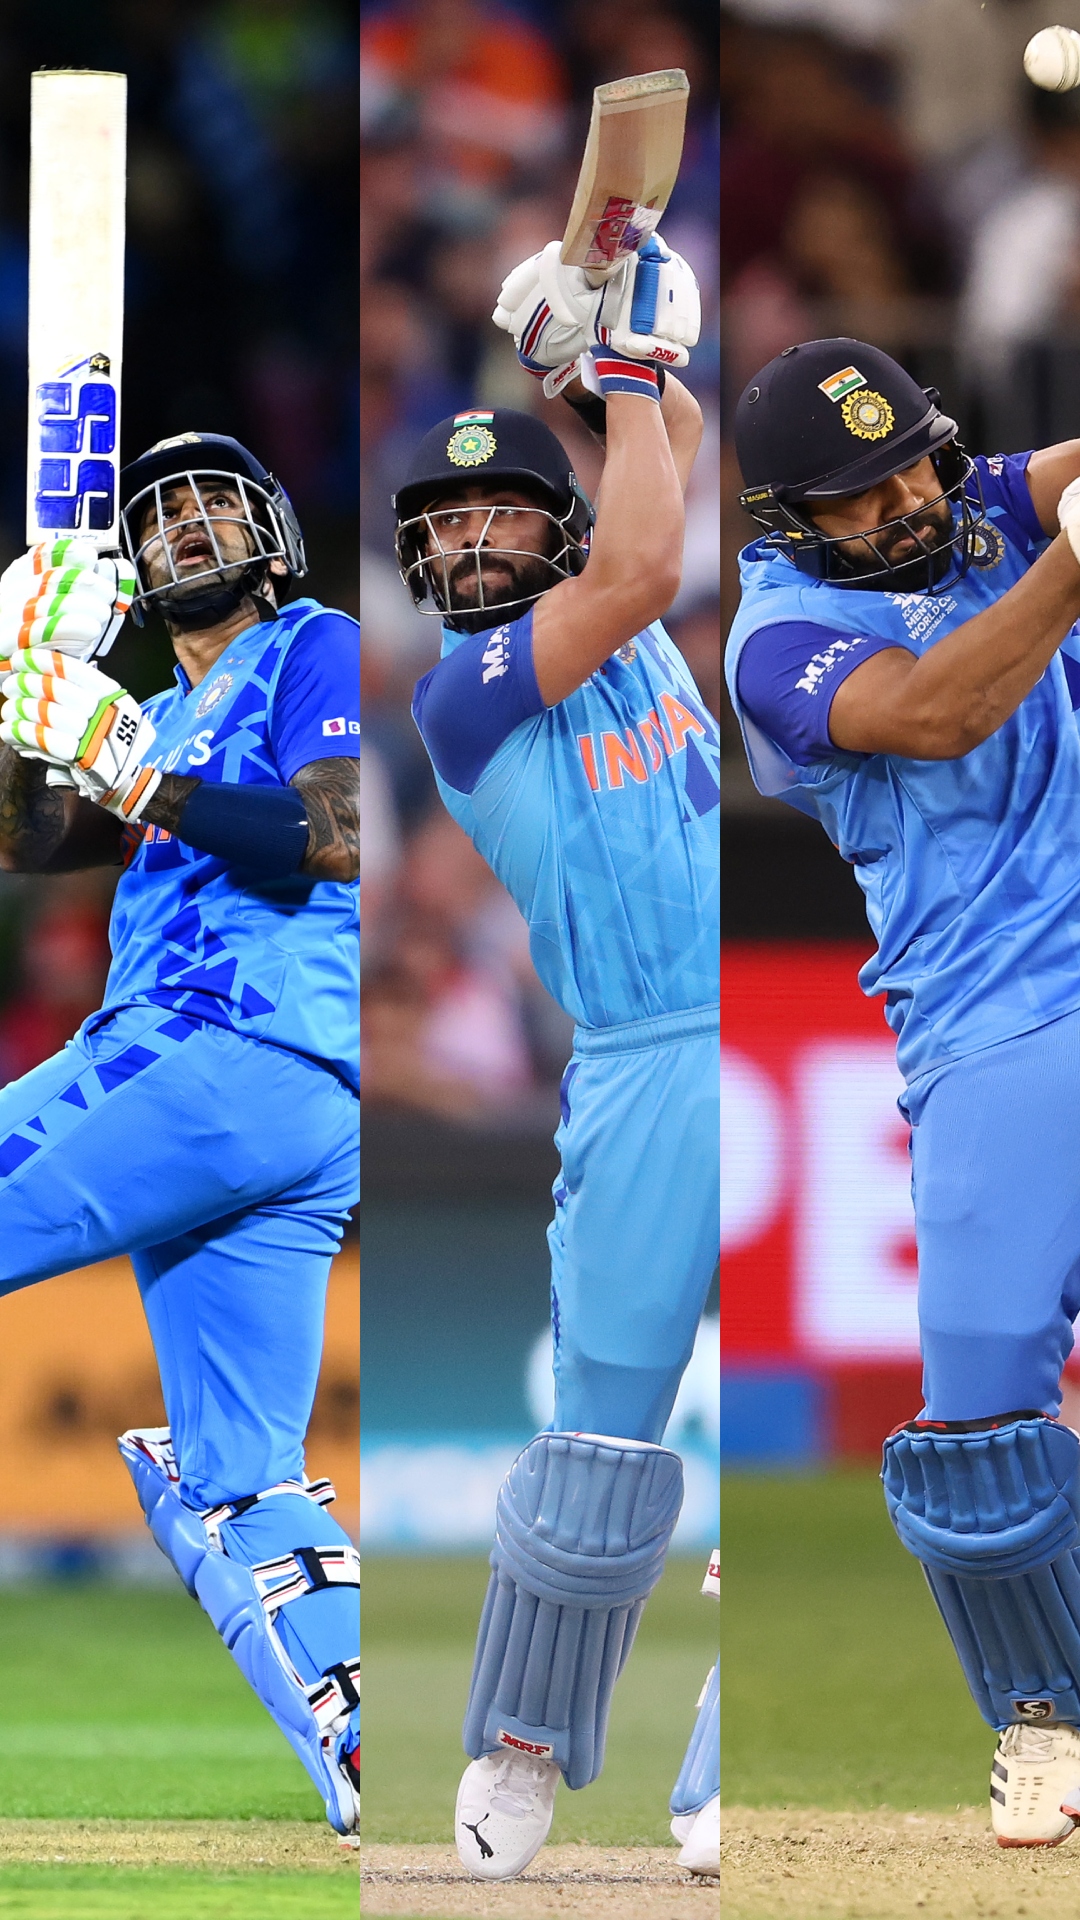 IND vs NZ 1st T20I: From Virat Kohli's 122* to Rohit Sharma's 118, here is a list of highest individual scores registered by Indian batsmen